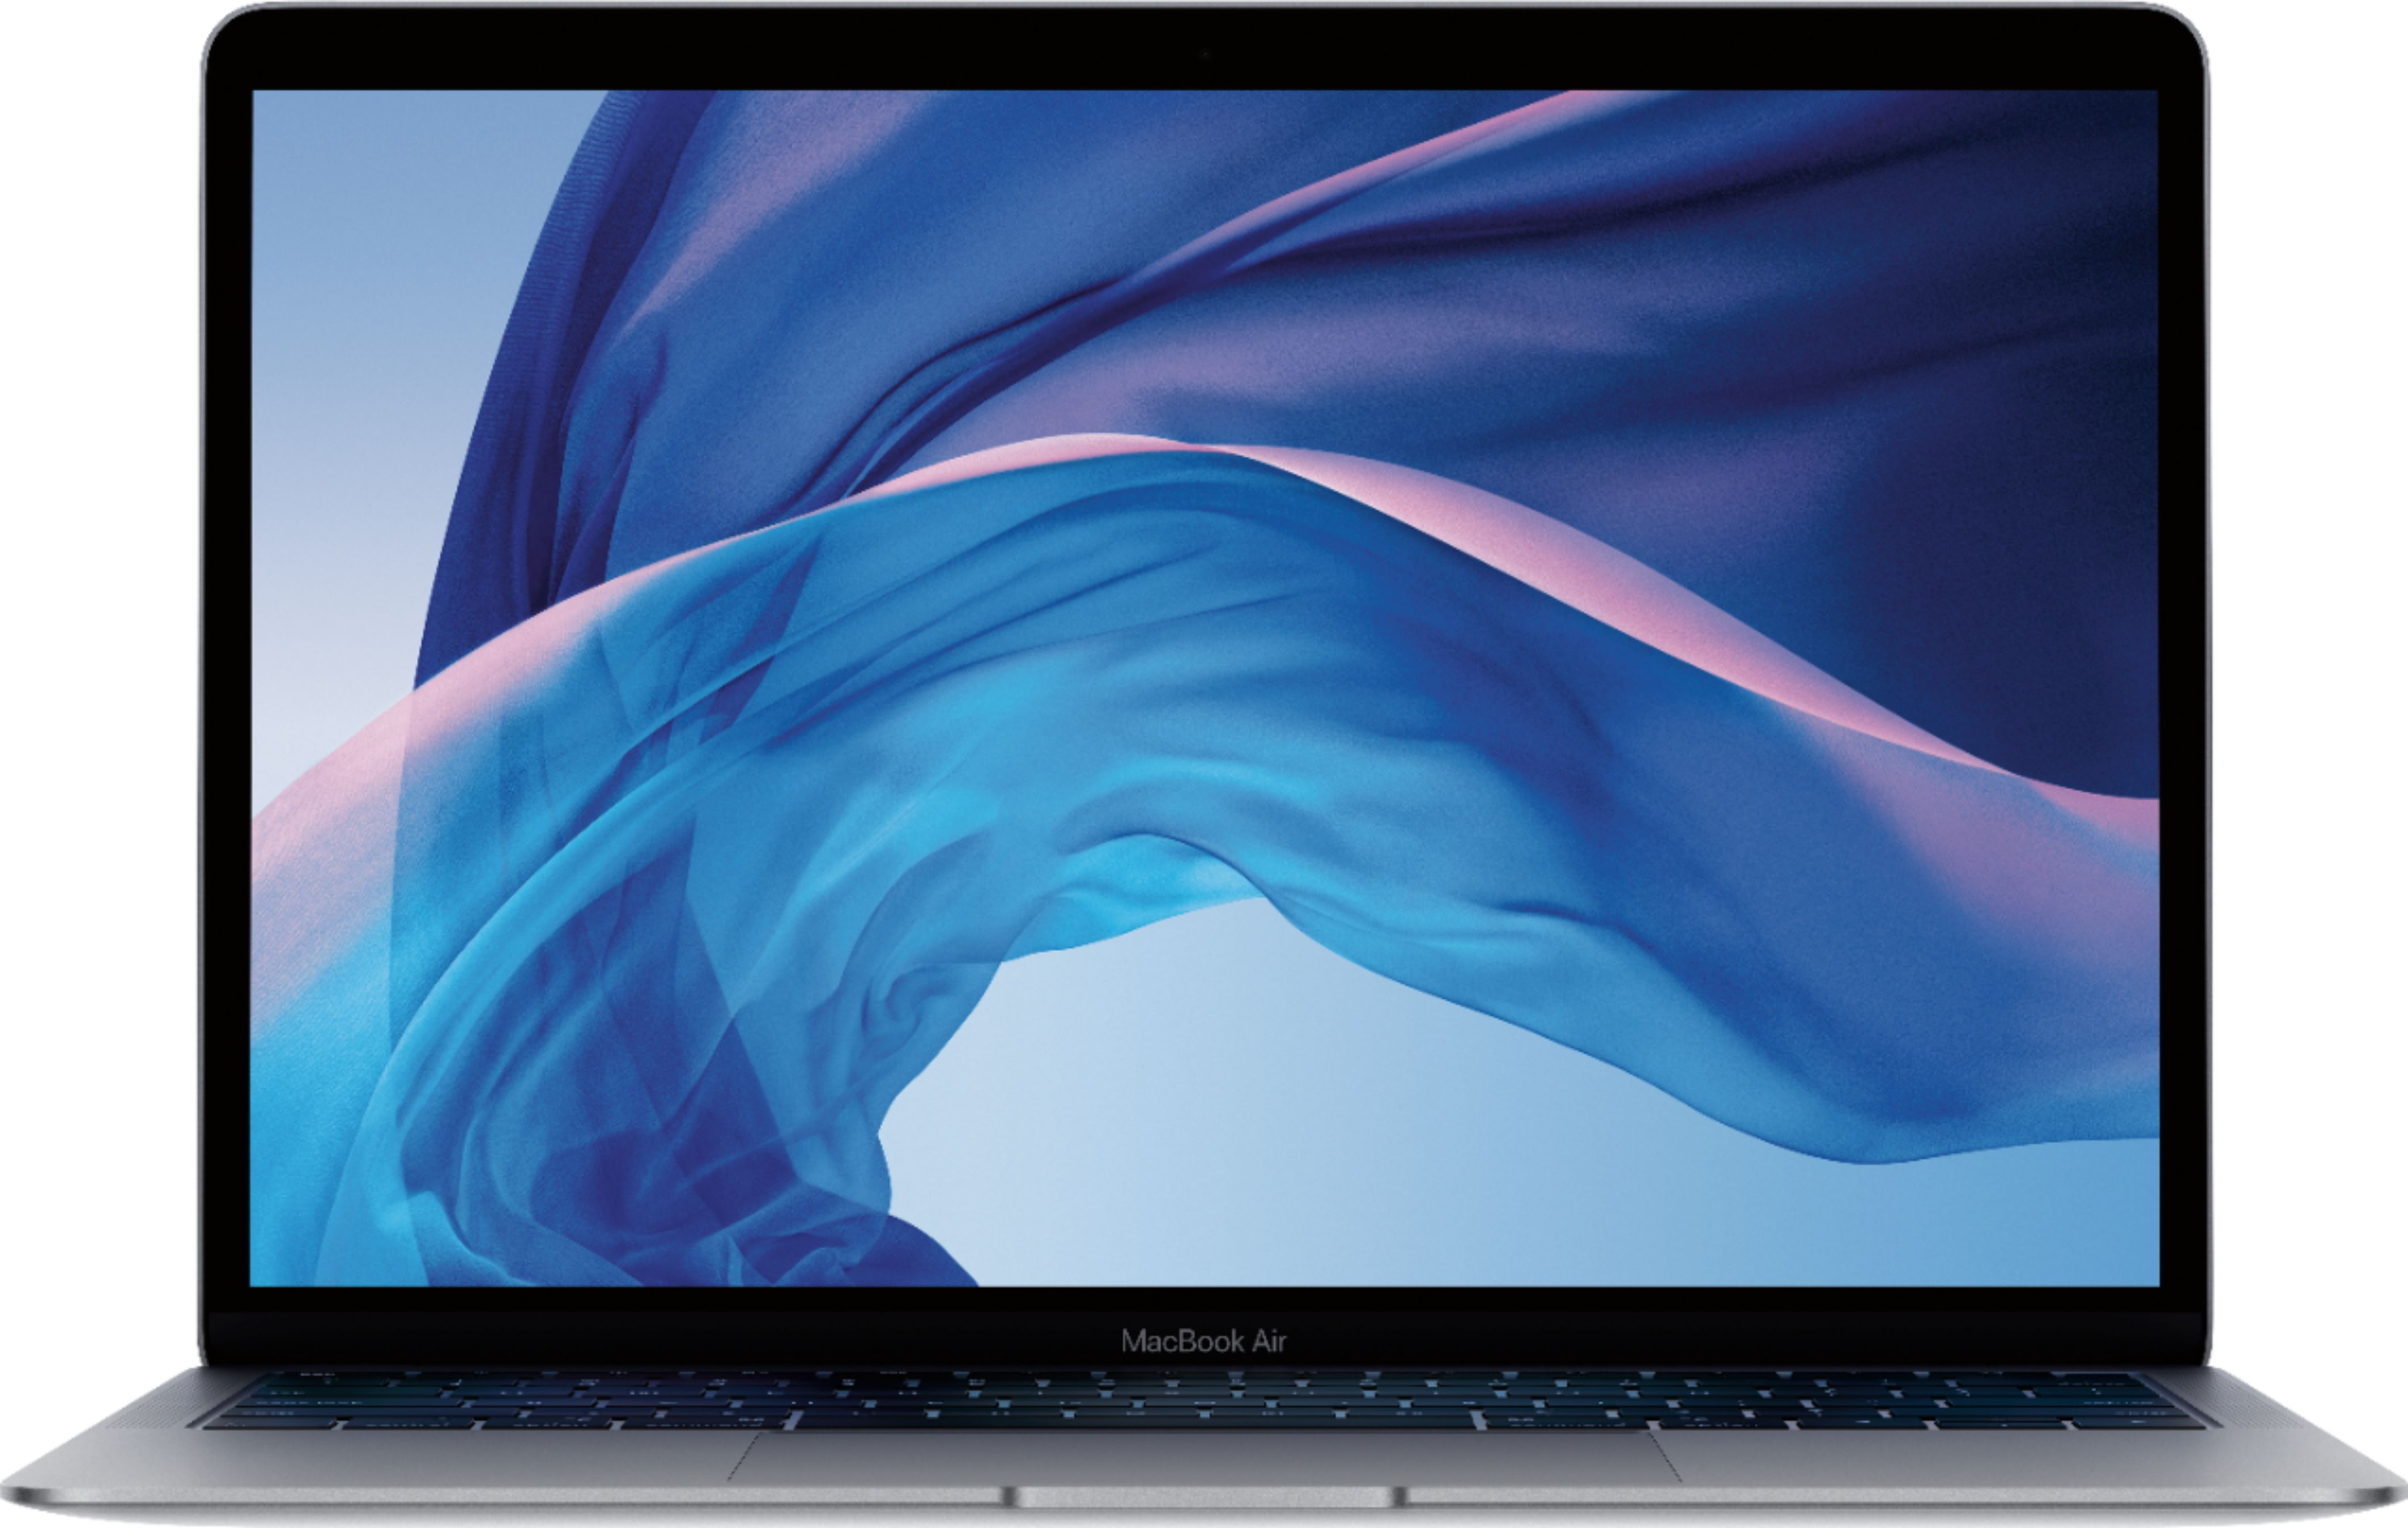 Best Buy Apple Macbook Air 13 3 Laptop Intel Core I5 8gb Memory 512gb Solid State Drive Space Gray